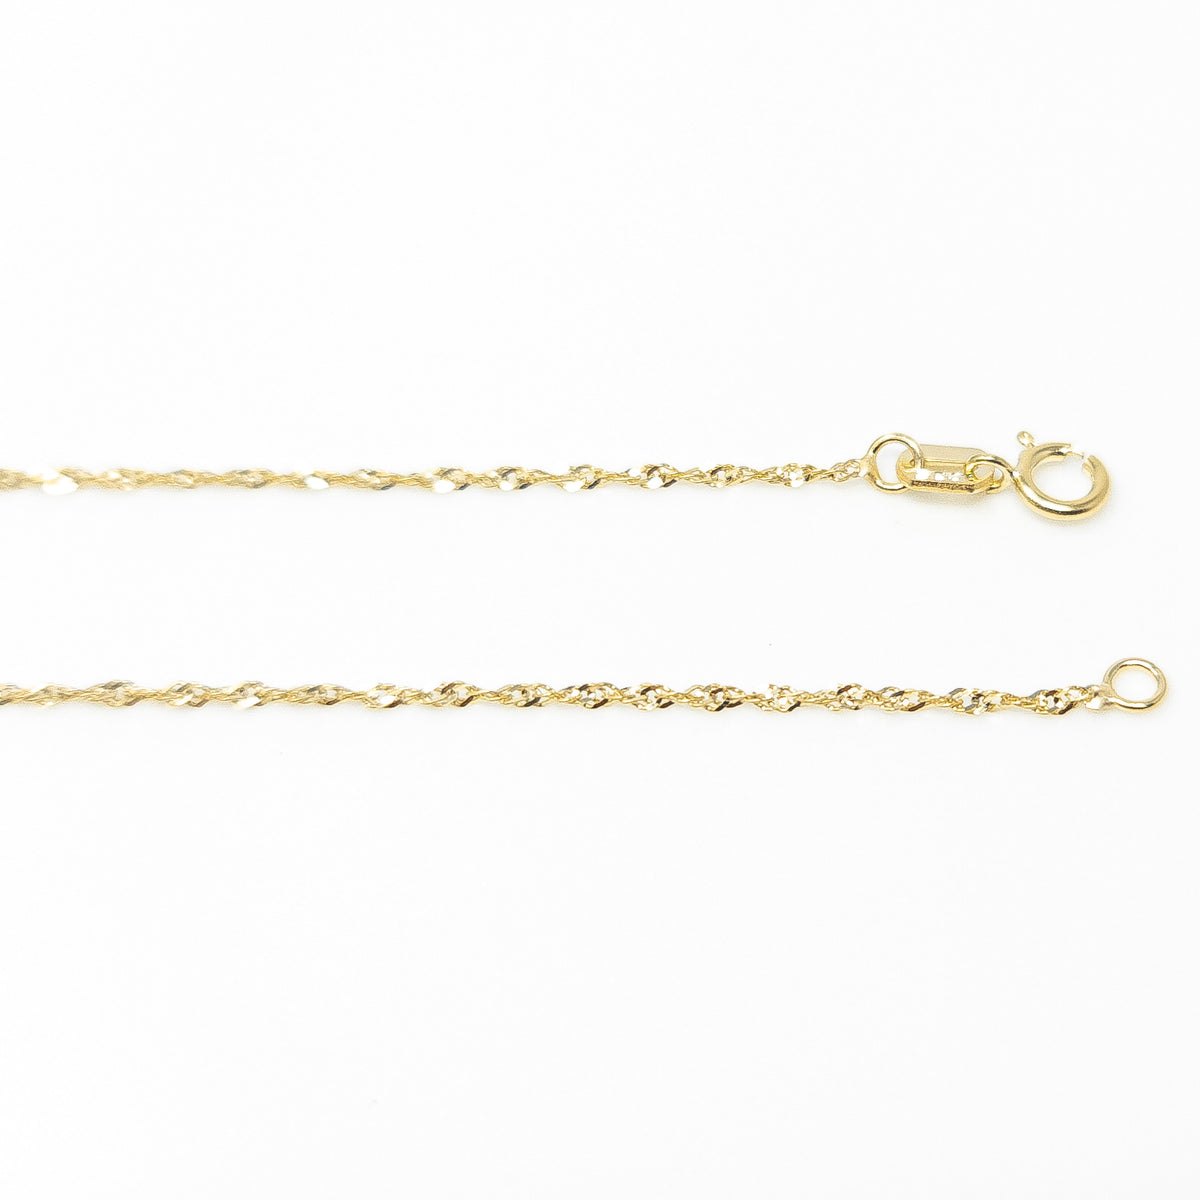 10K Gold Singapore Chain with Spring Clasp - 1.8 mm - Variuos Lenght